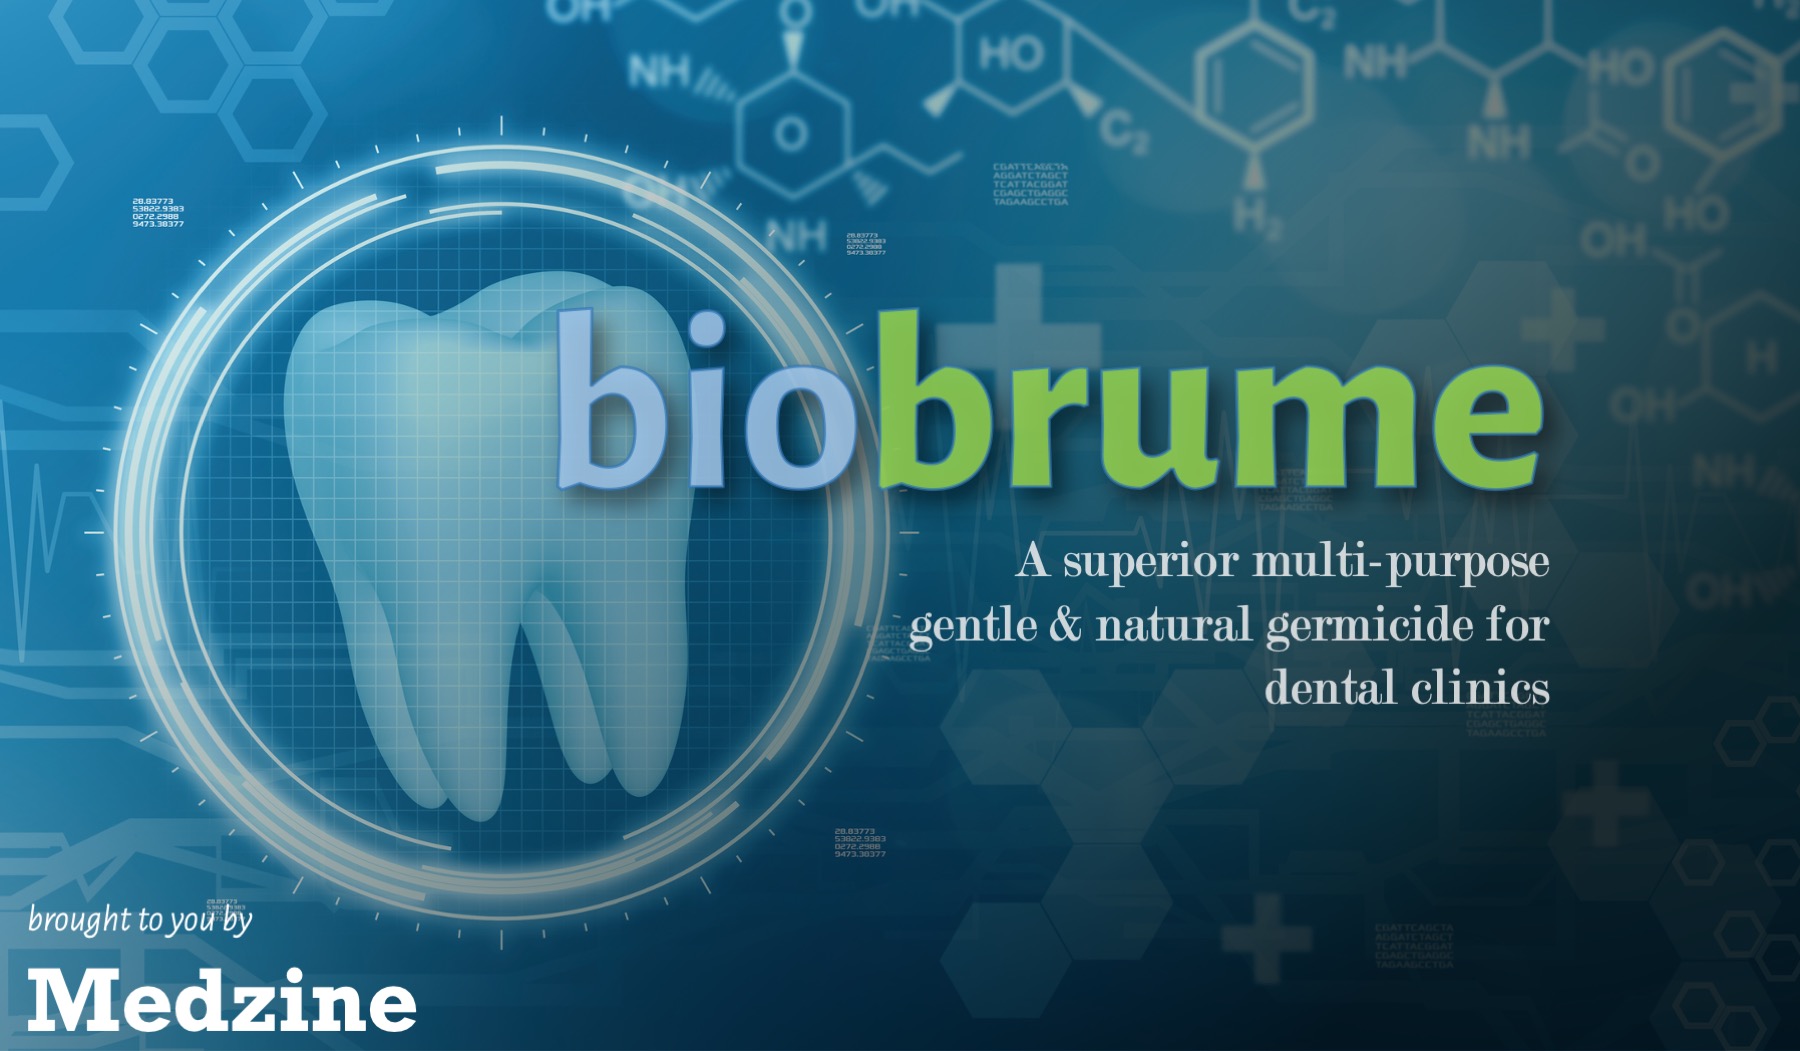 Use Biobrume To Exceed Sanitation & Disinfection Protocols In Dental Clinics